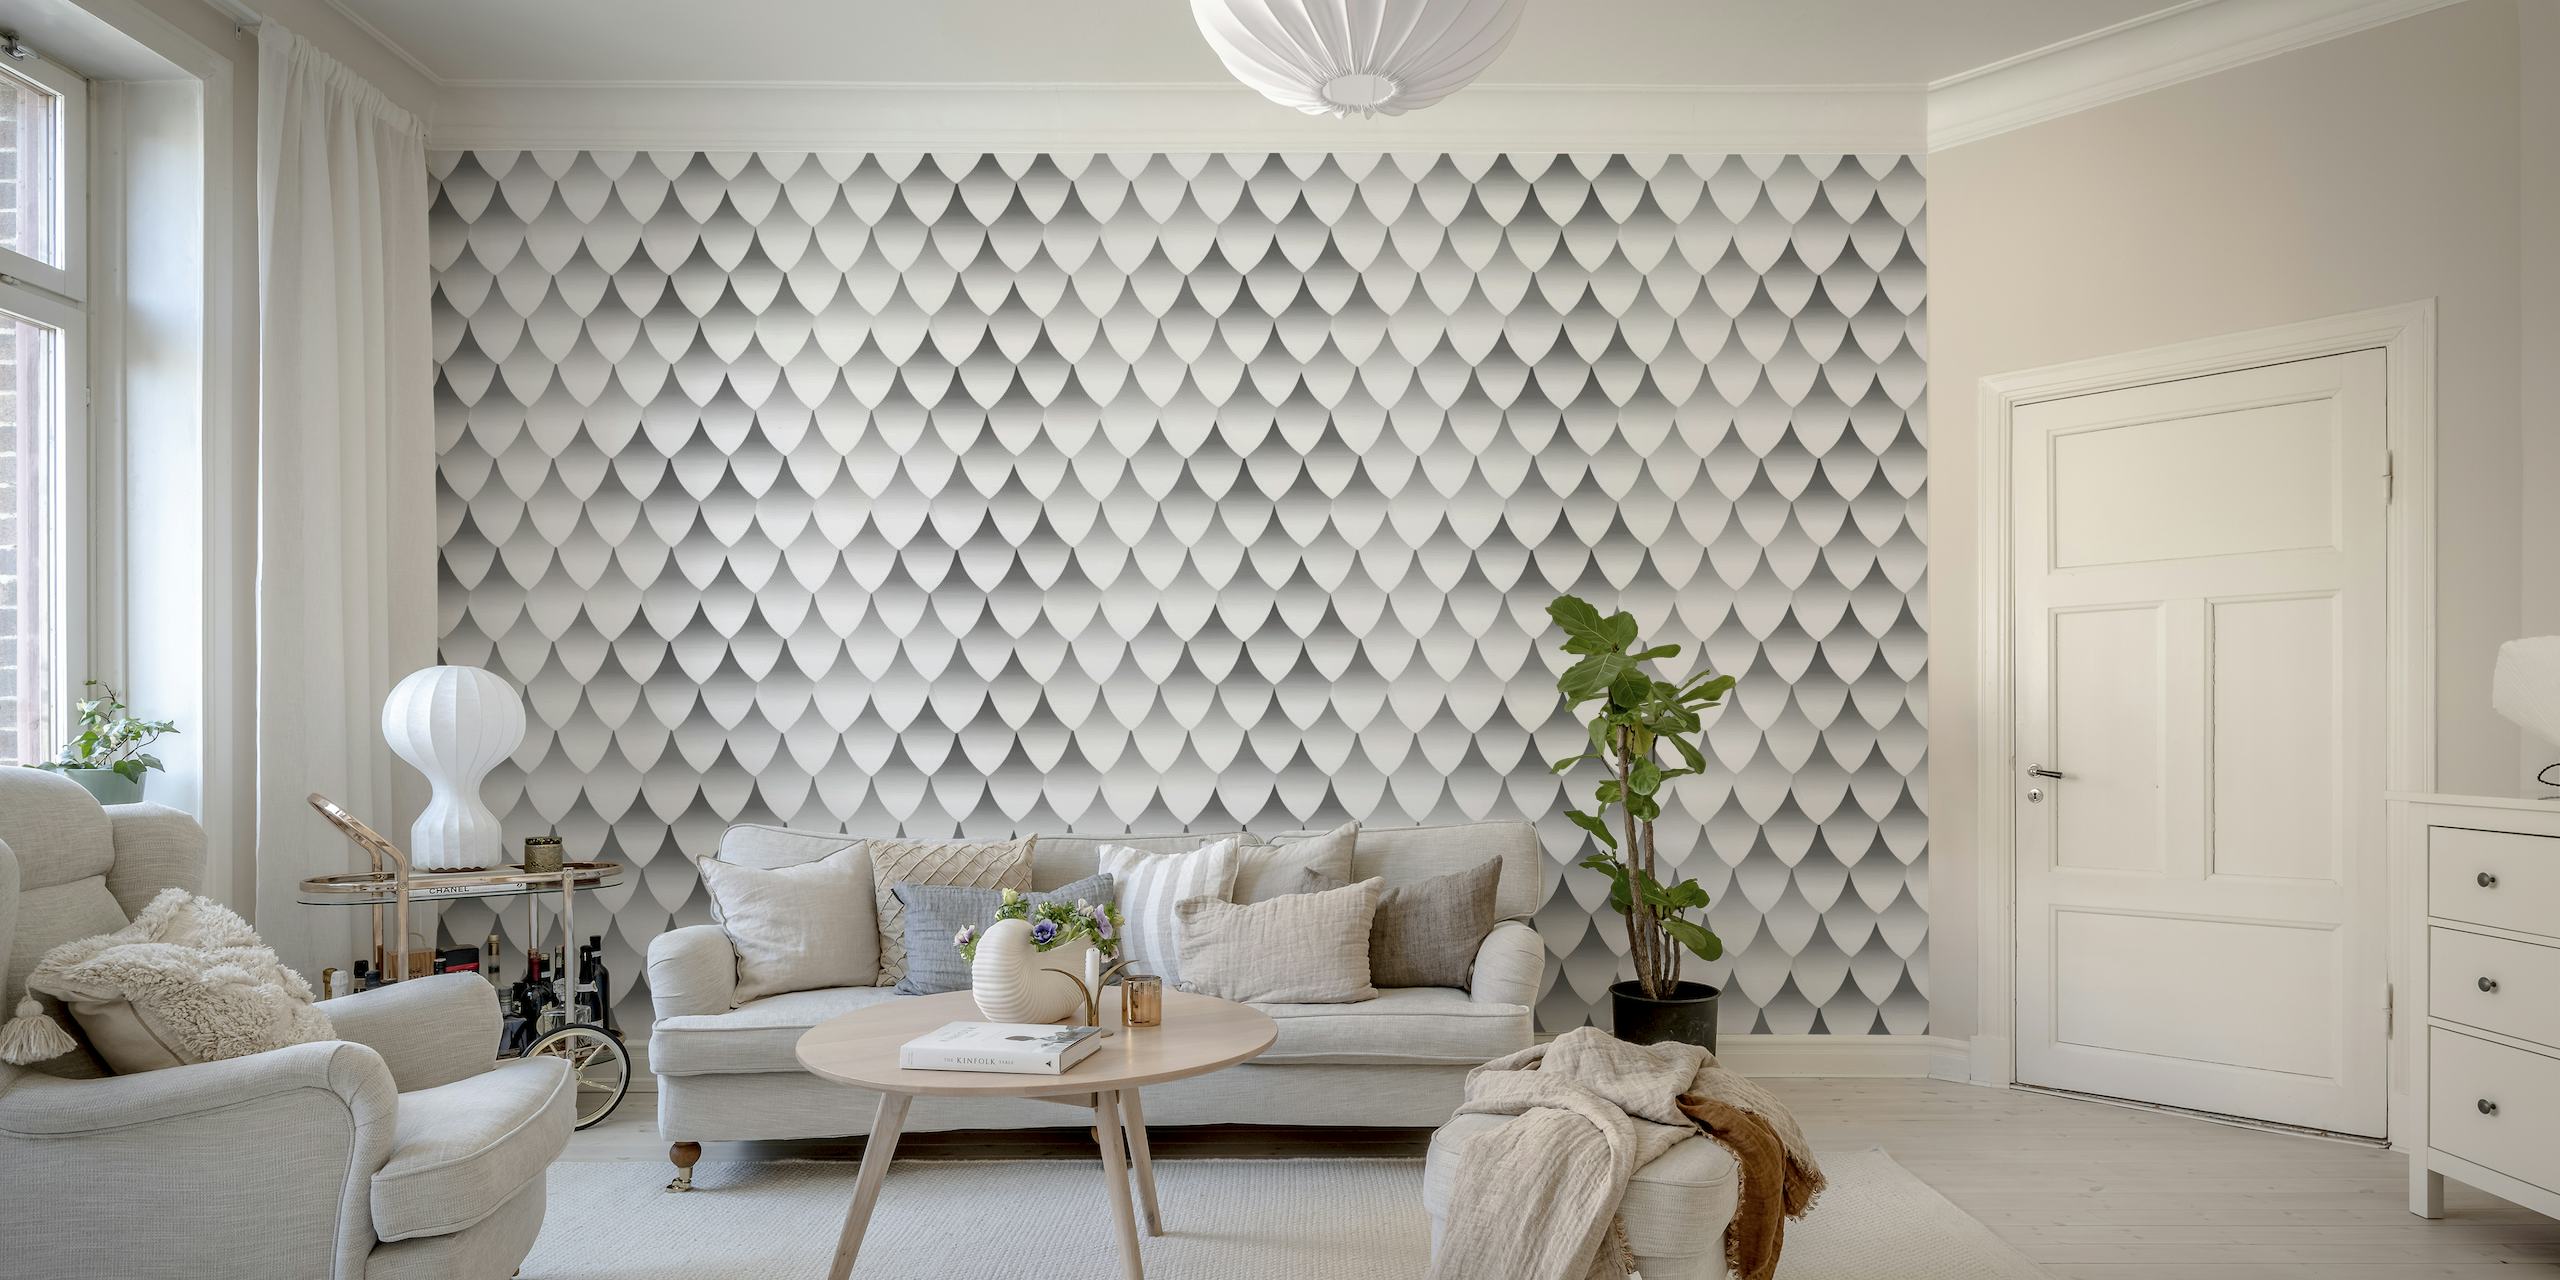 Gray mermaid scale pattern wall mural for interior decor